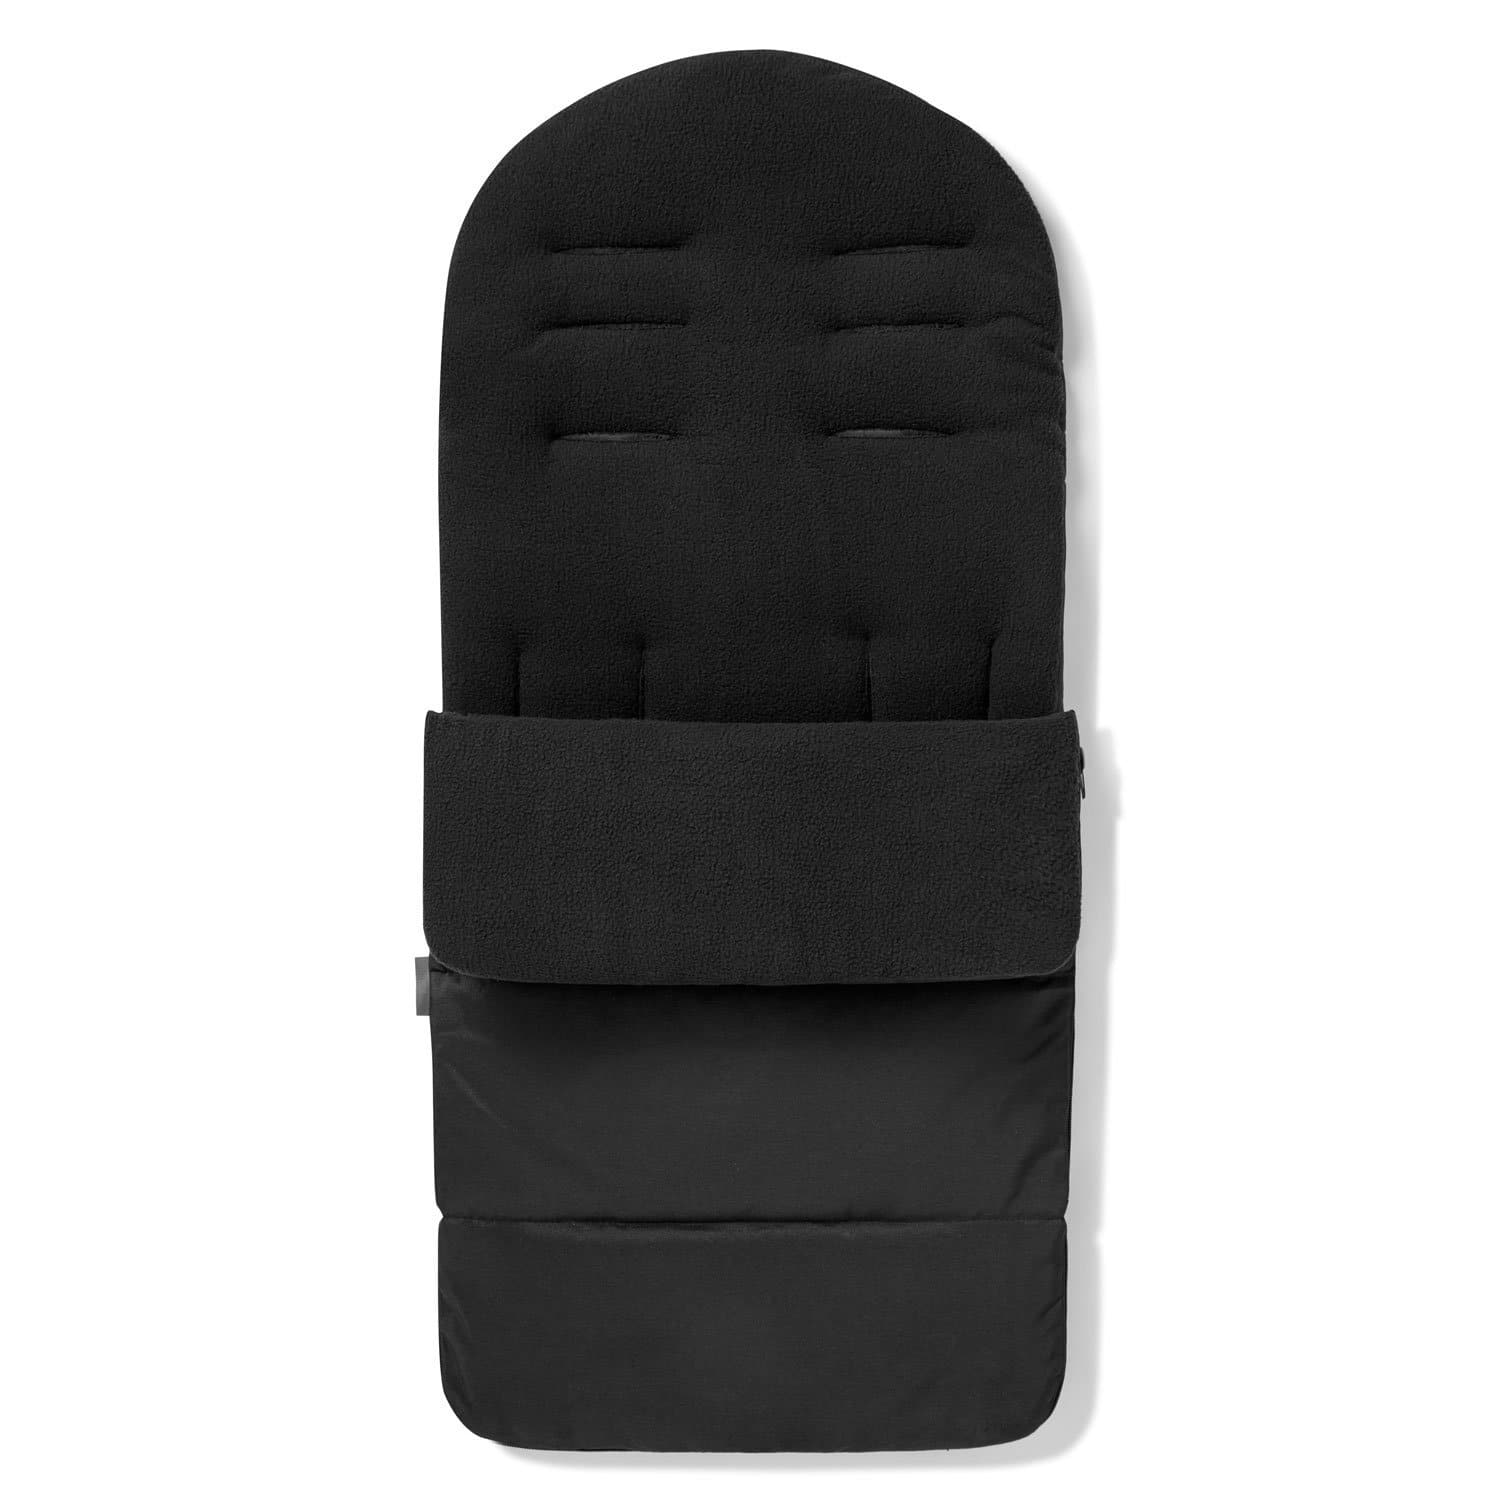 Premium Footmuff / Cosy Toes Compatible with Esprit - Black Jack / Fits All Models | For Your Little One